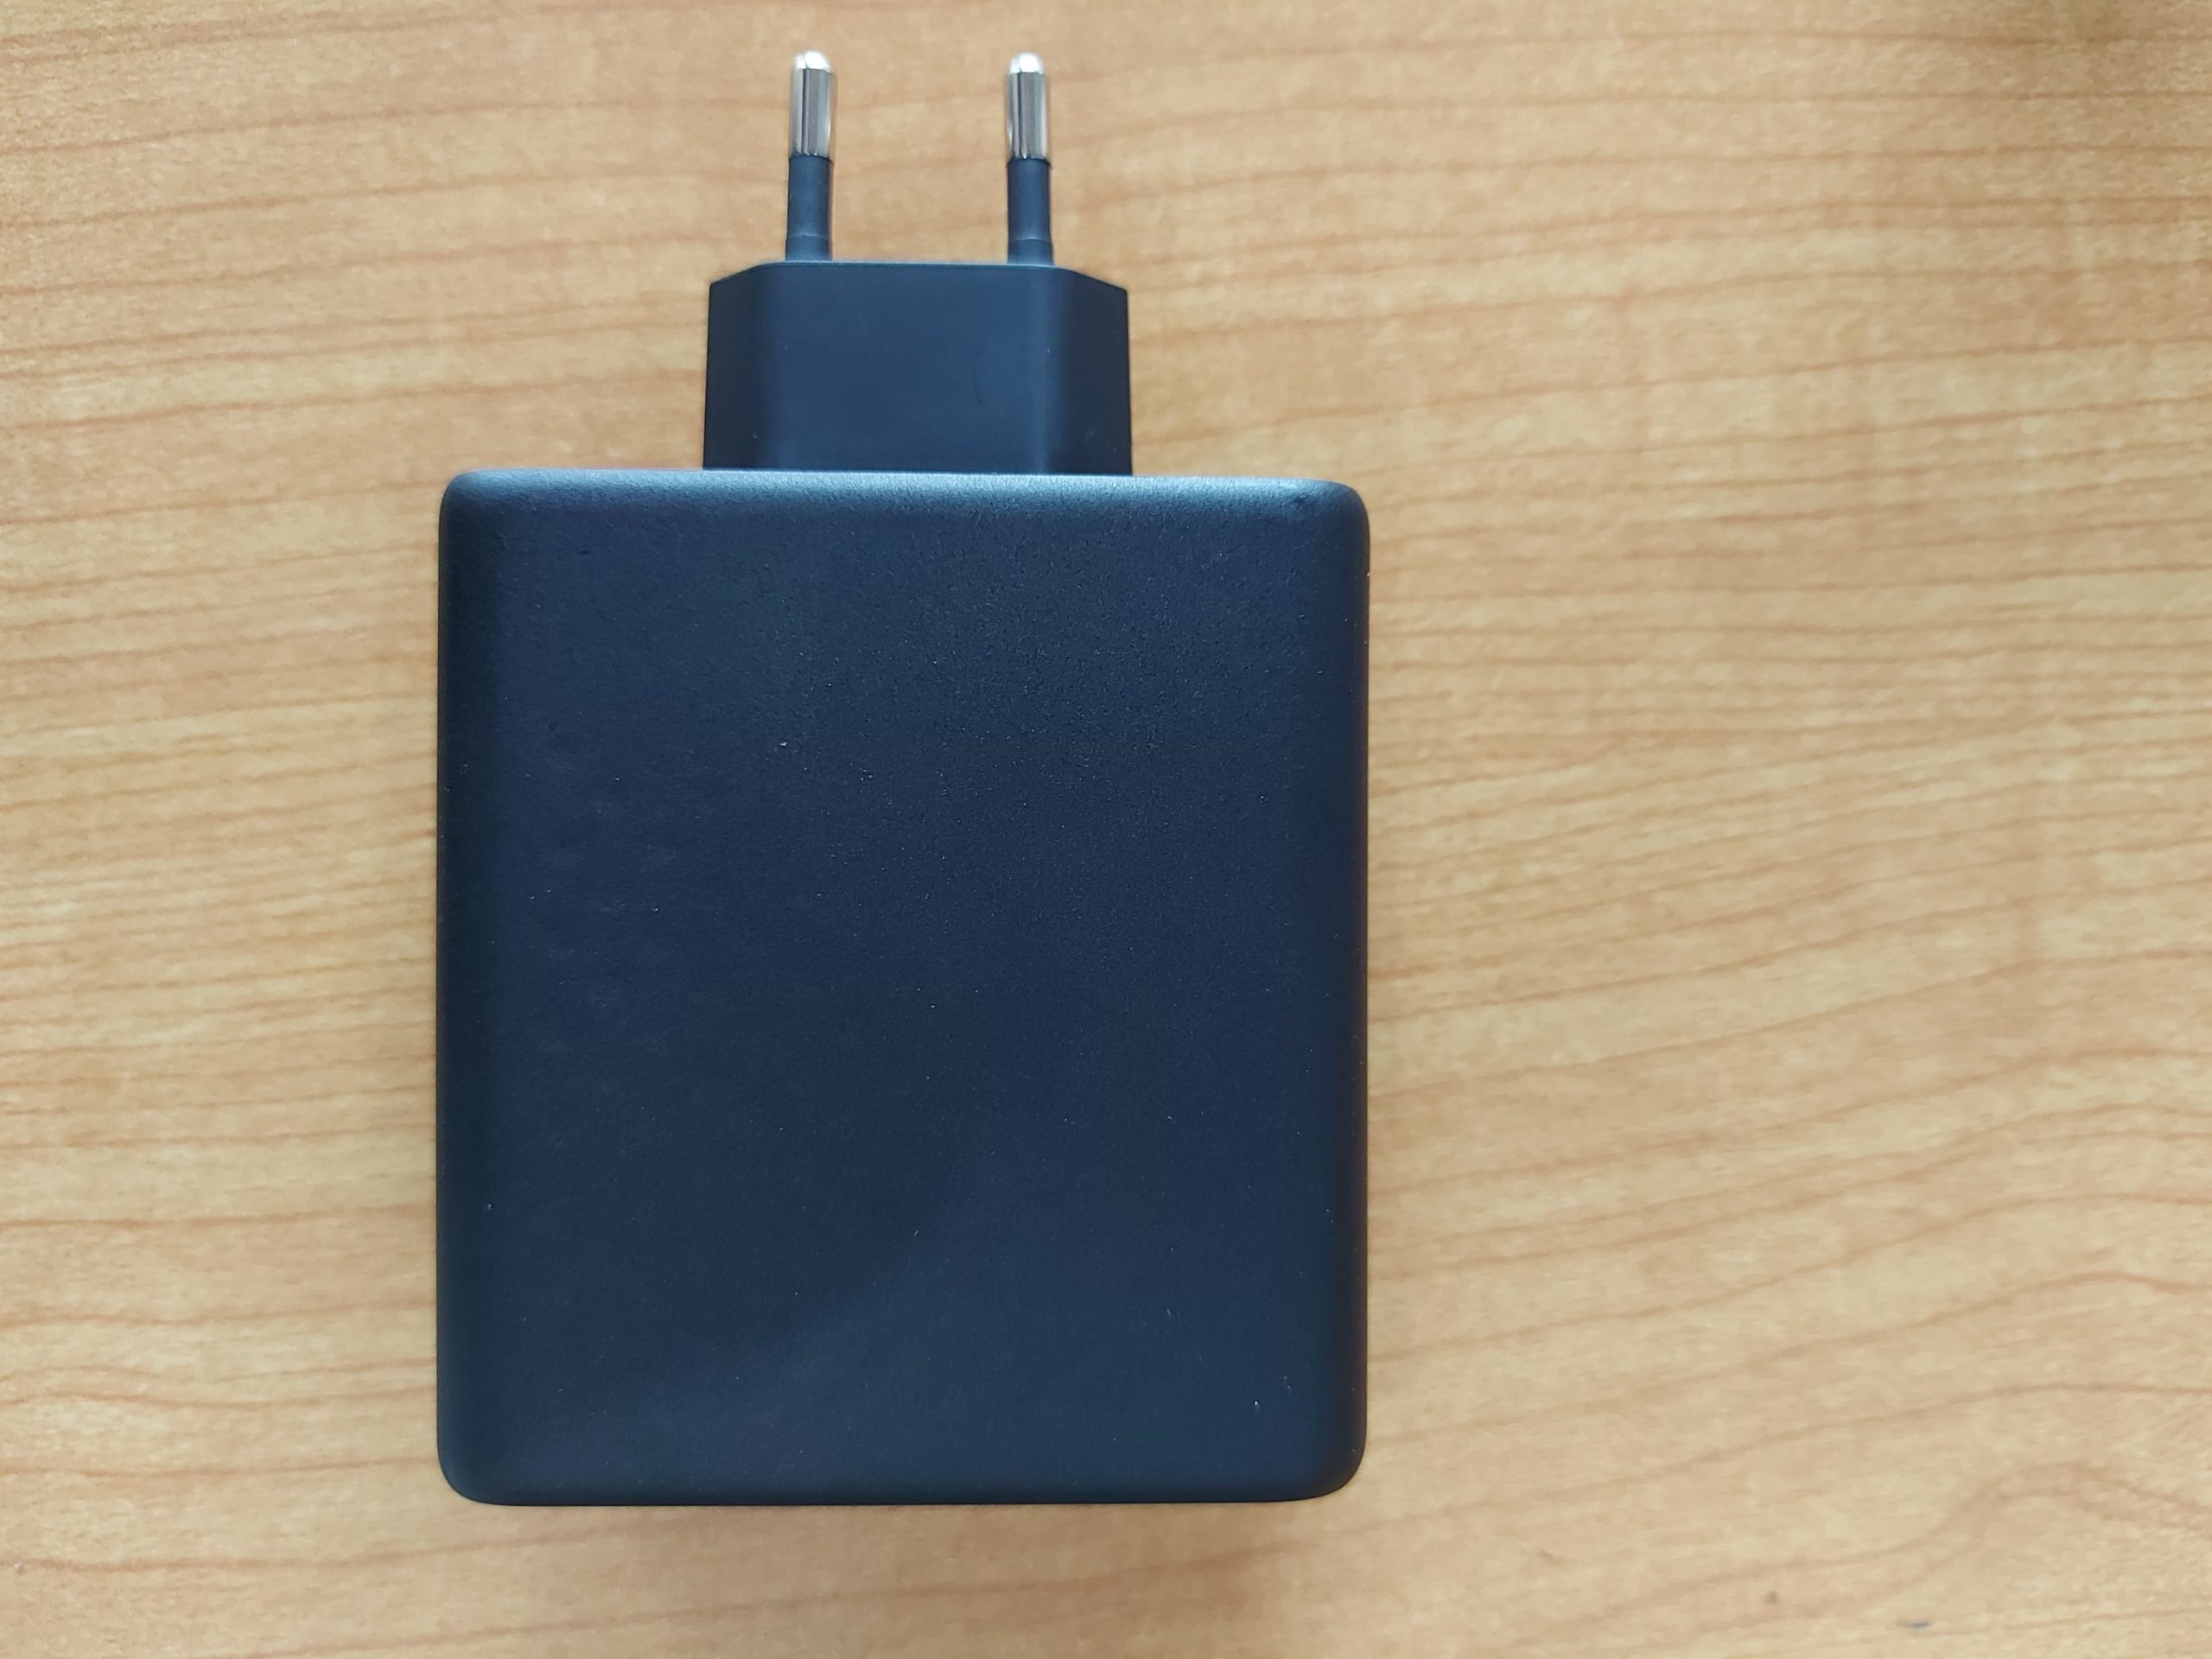 VOLTME 140W USB-C Charger